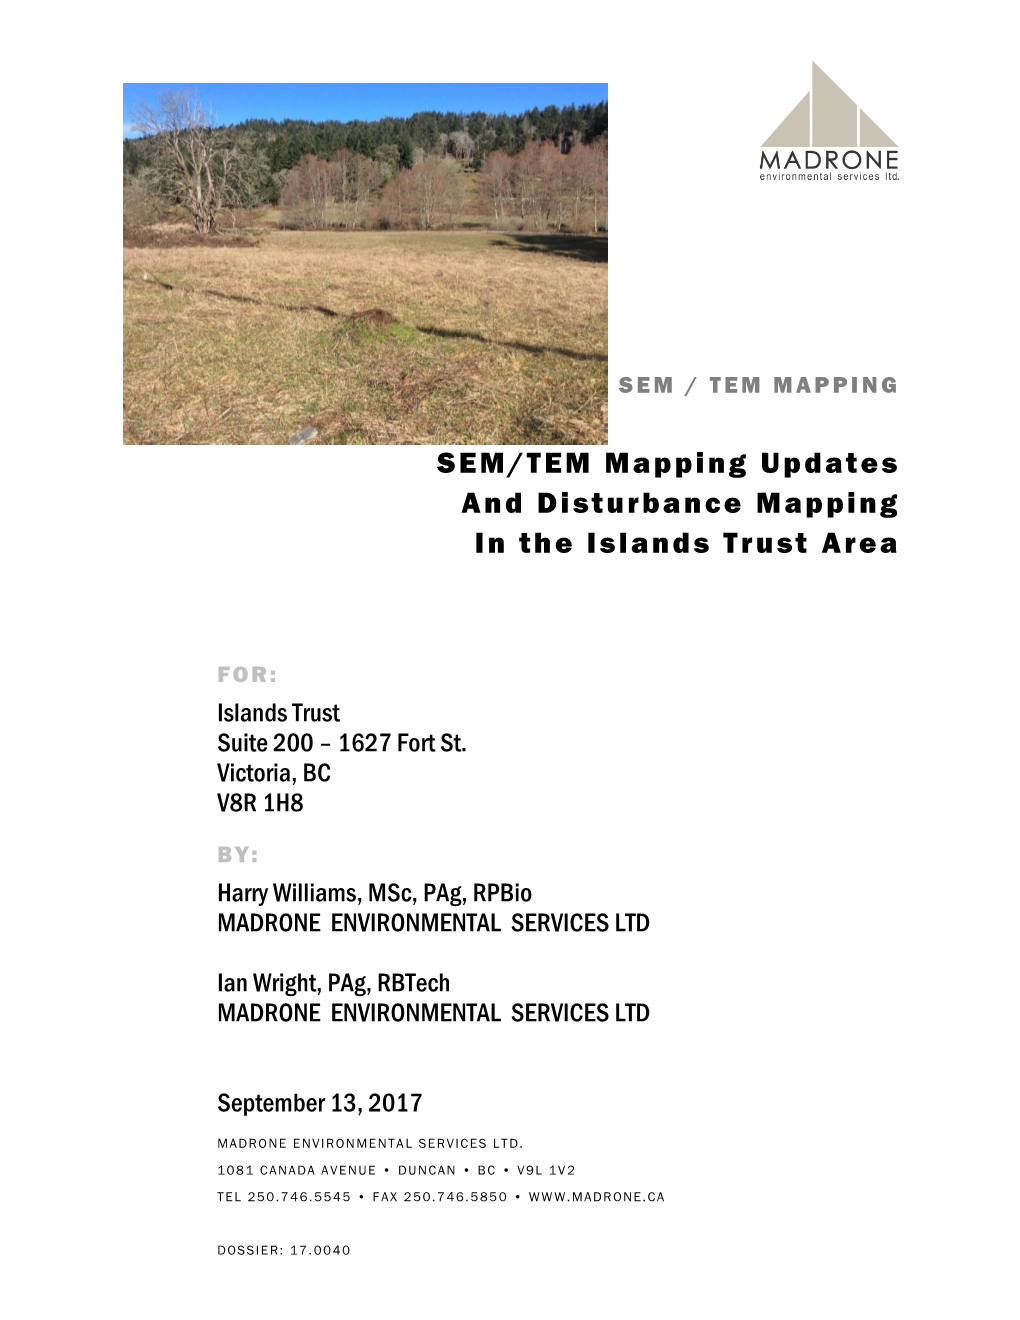 SEM/TEM Mapping Updates and Disturbance Mapping